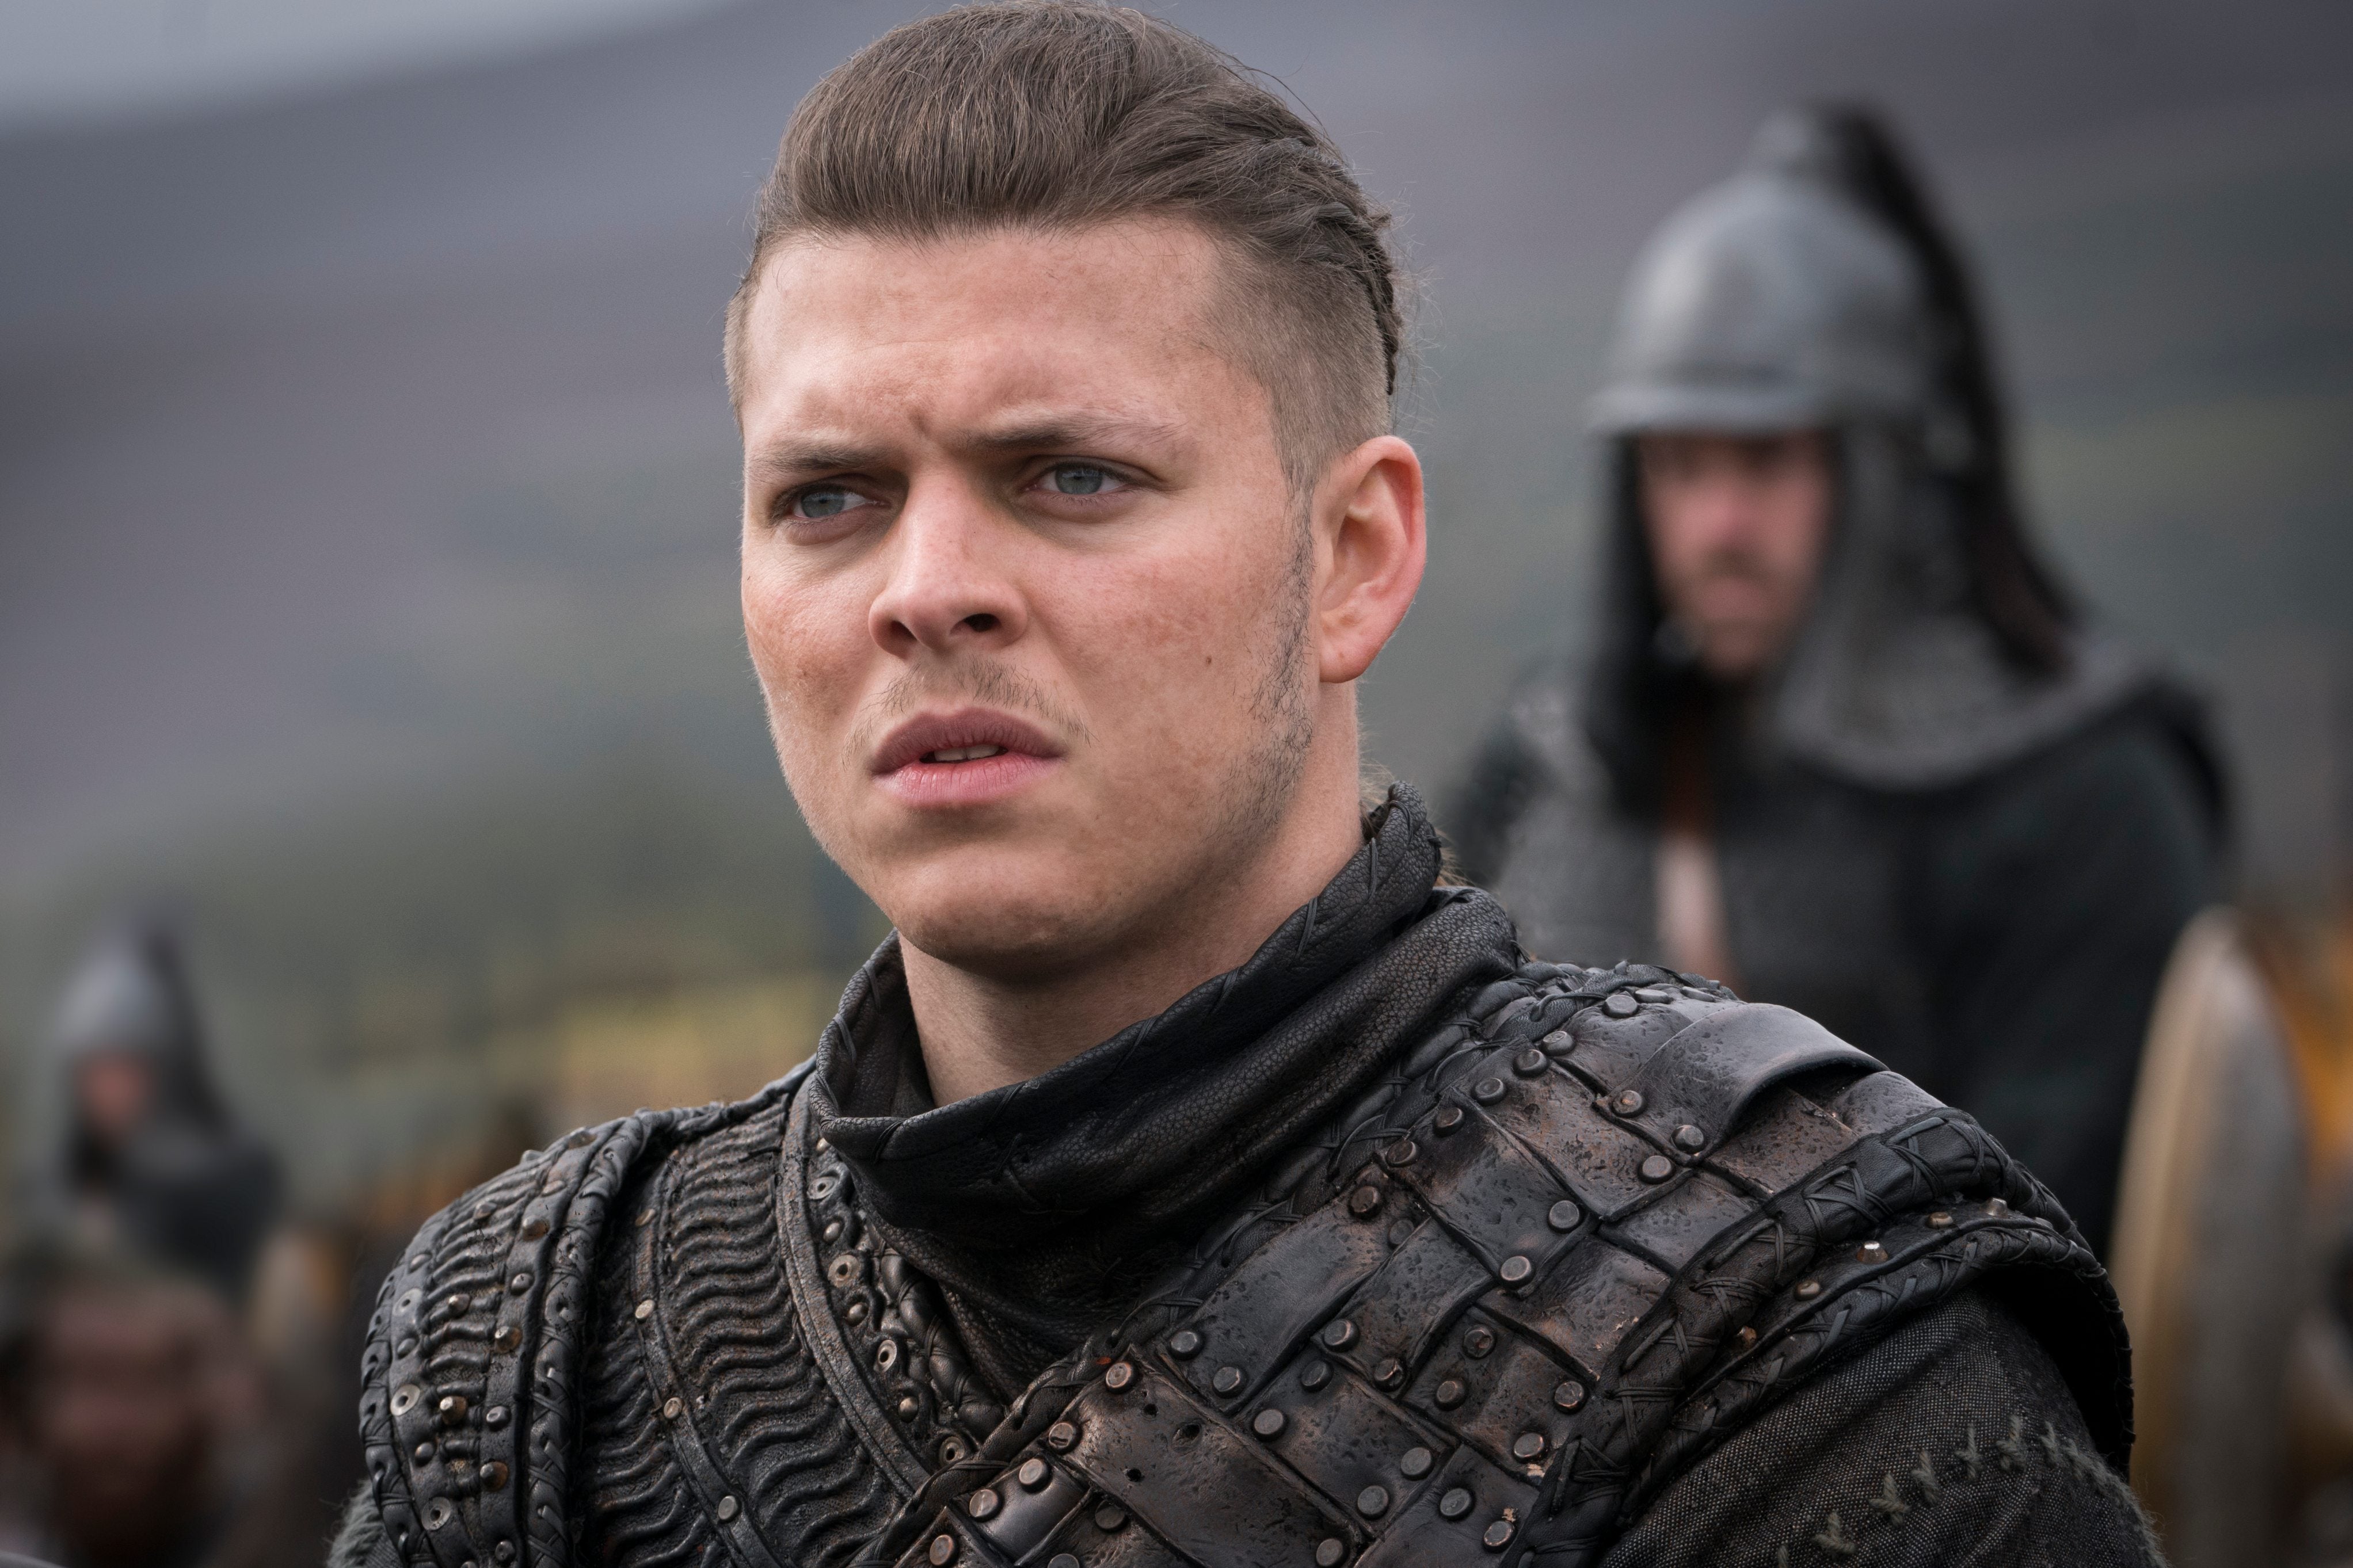 Vikings' Bjorn Ironside star insists time was right to end the show, TV &  Radio, Showbiz & TV